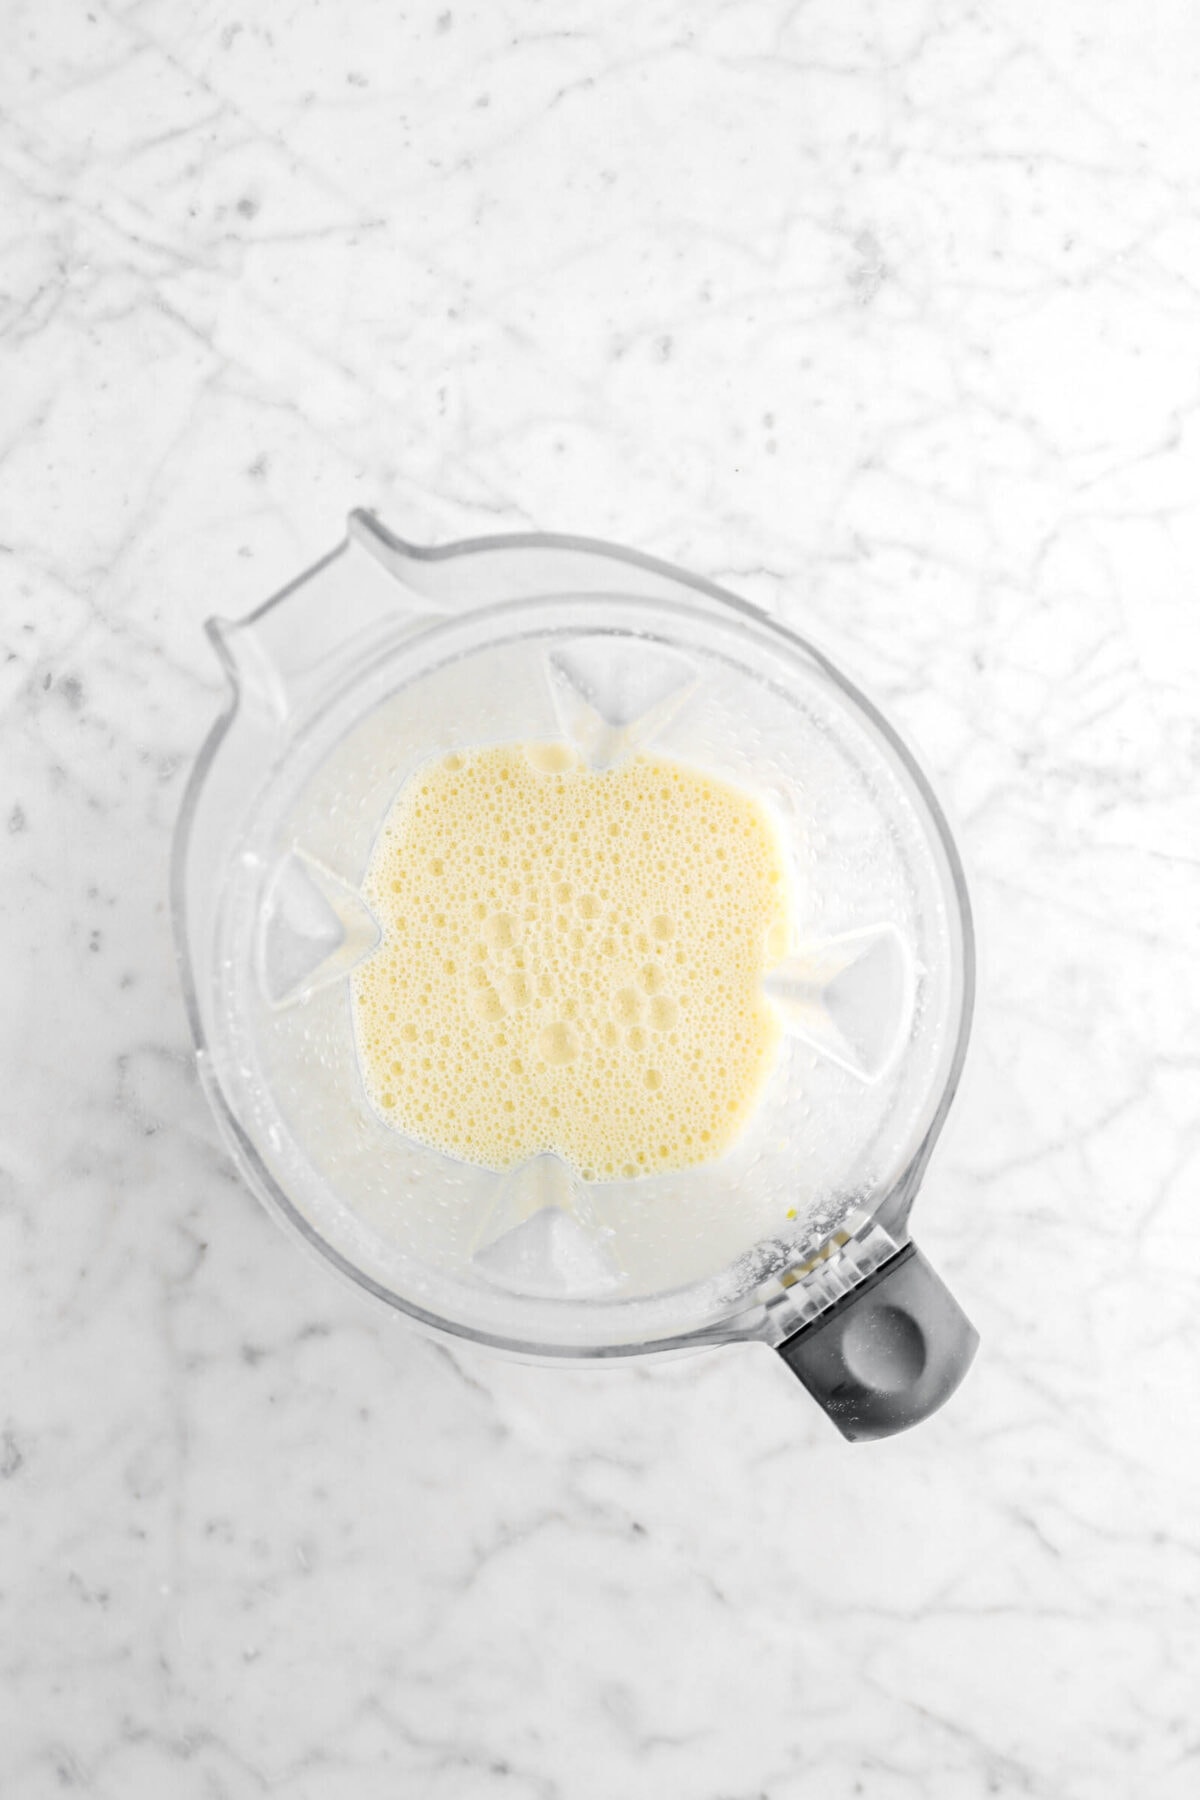 clafoutis batter in blender on marble surface